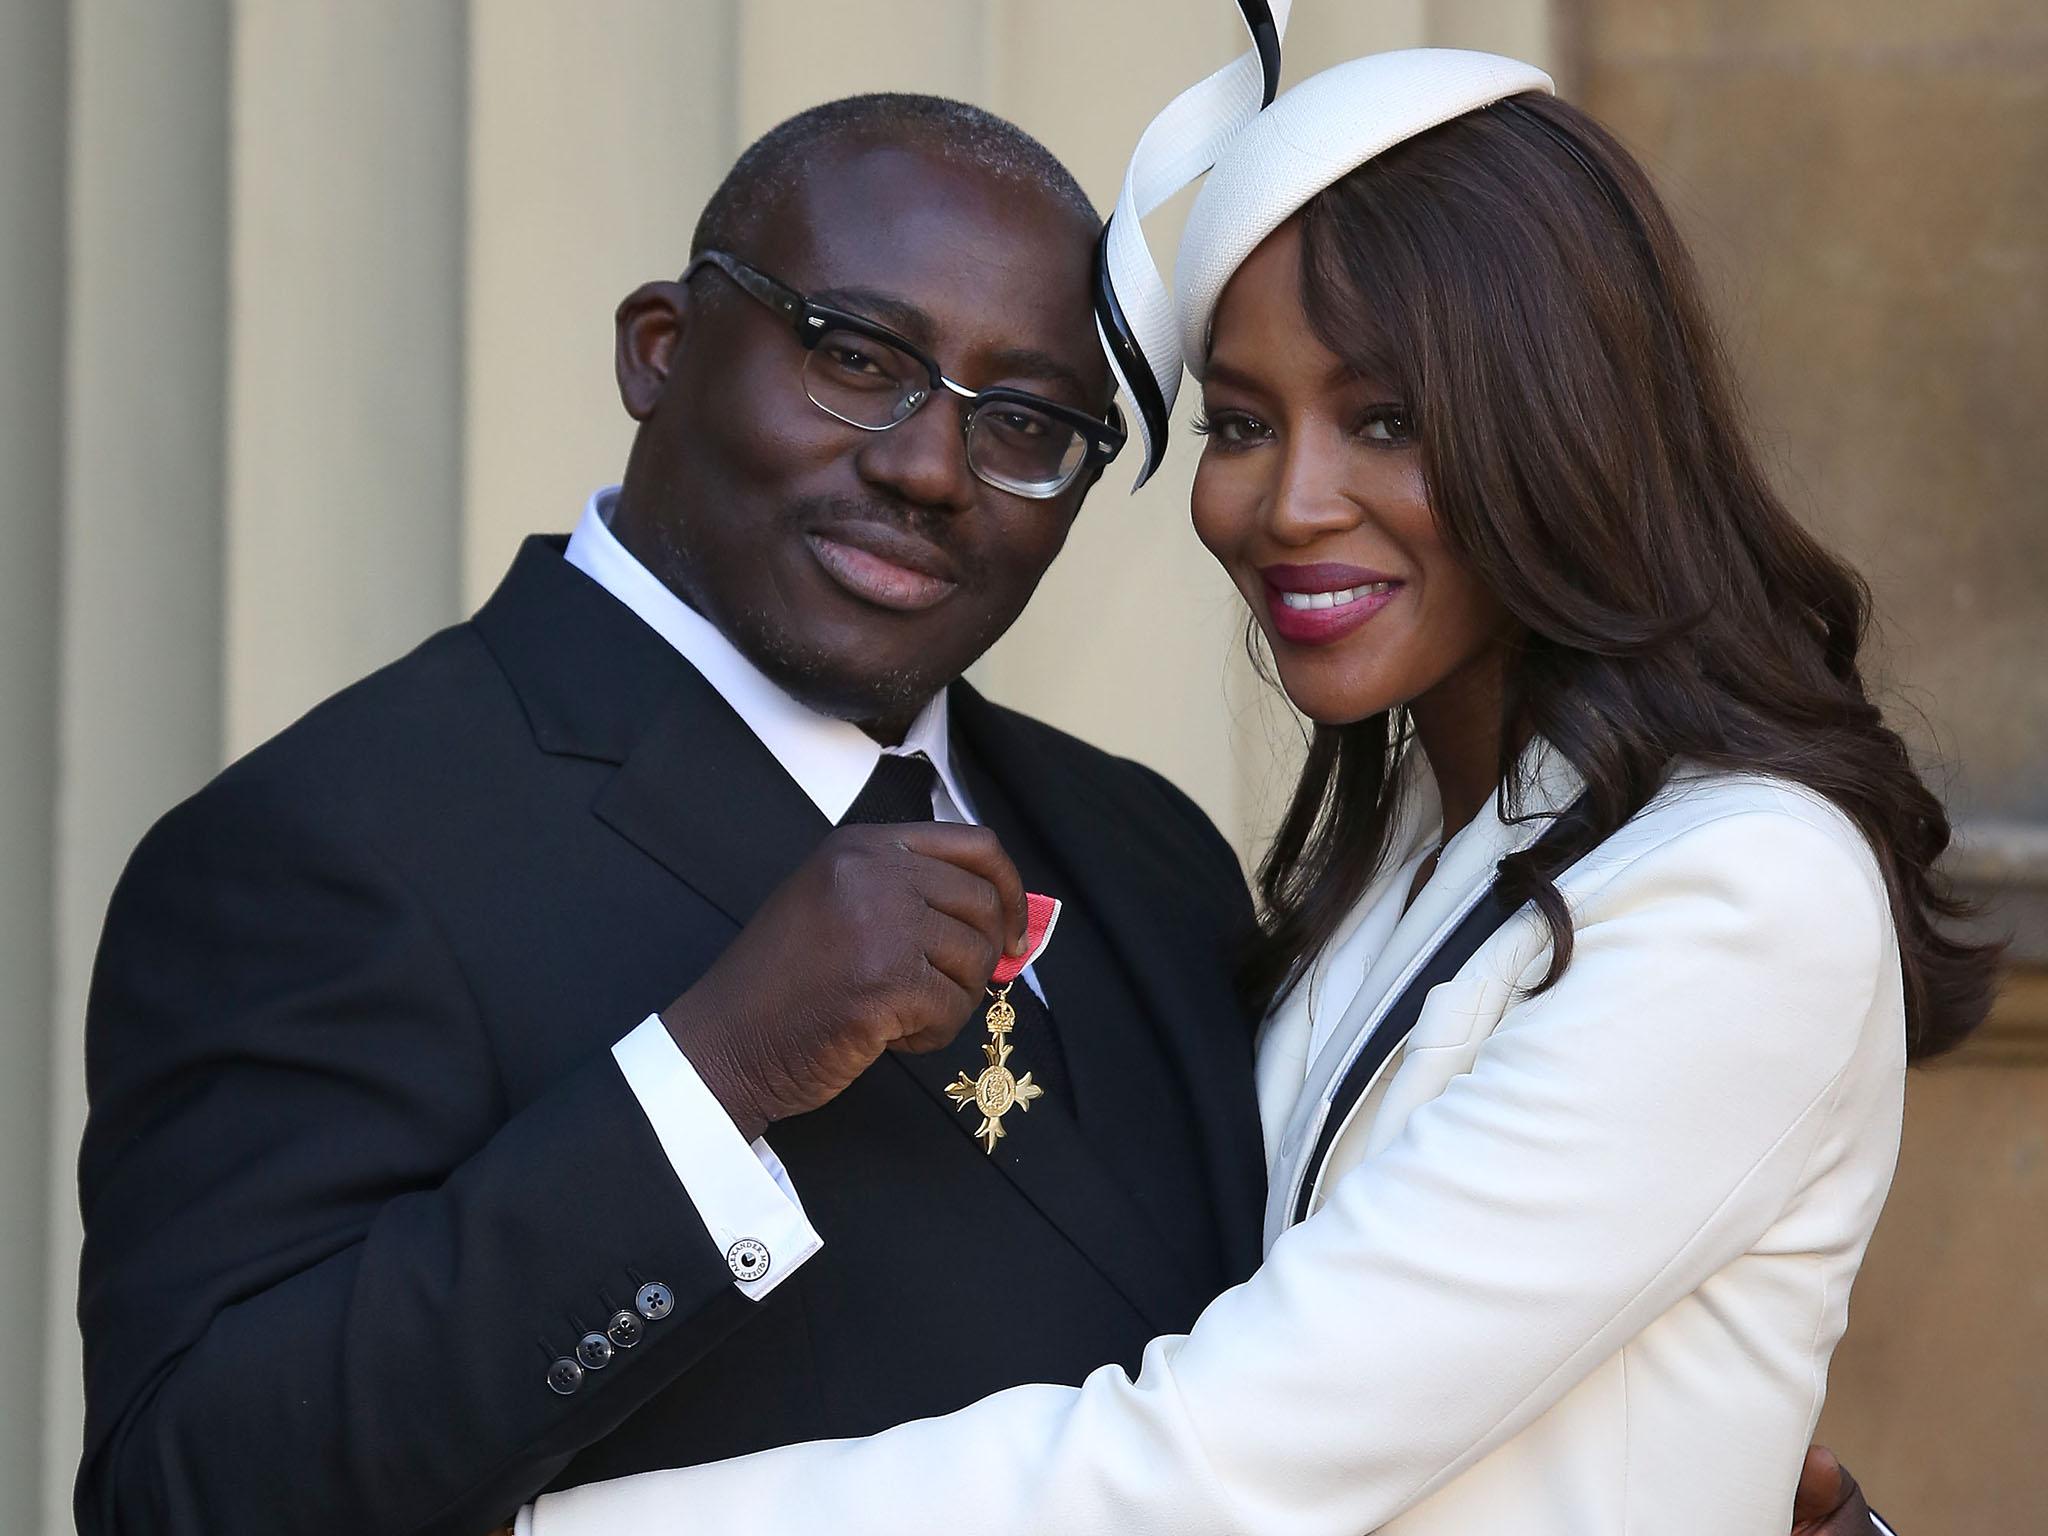 Naomi Campbell poses with Enninful after he received his OBE at Buckingham Palace last year